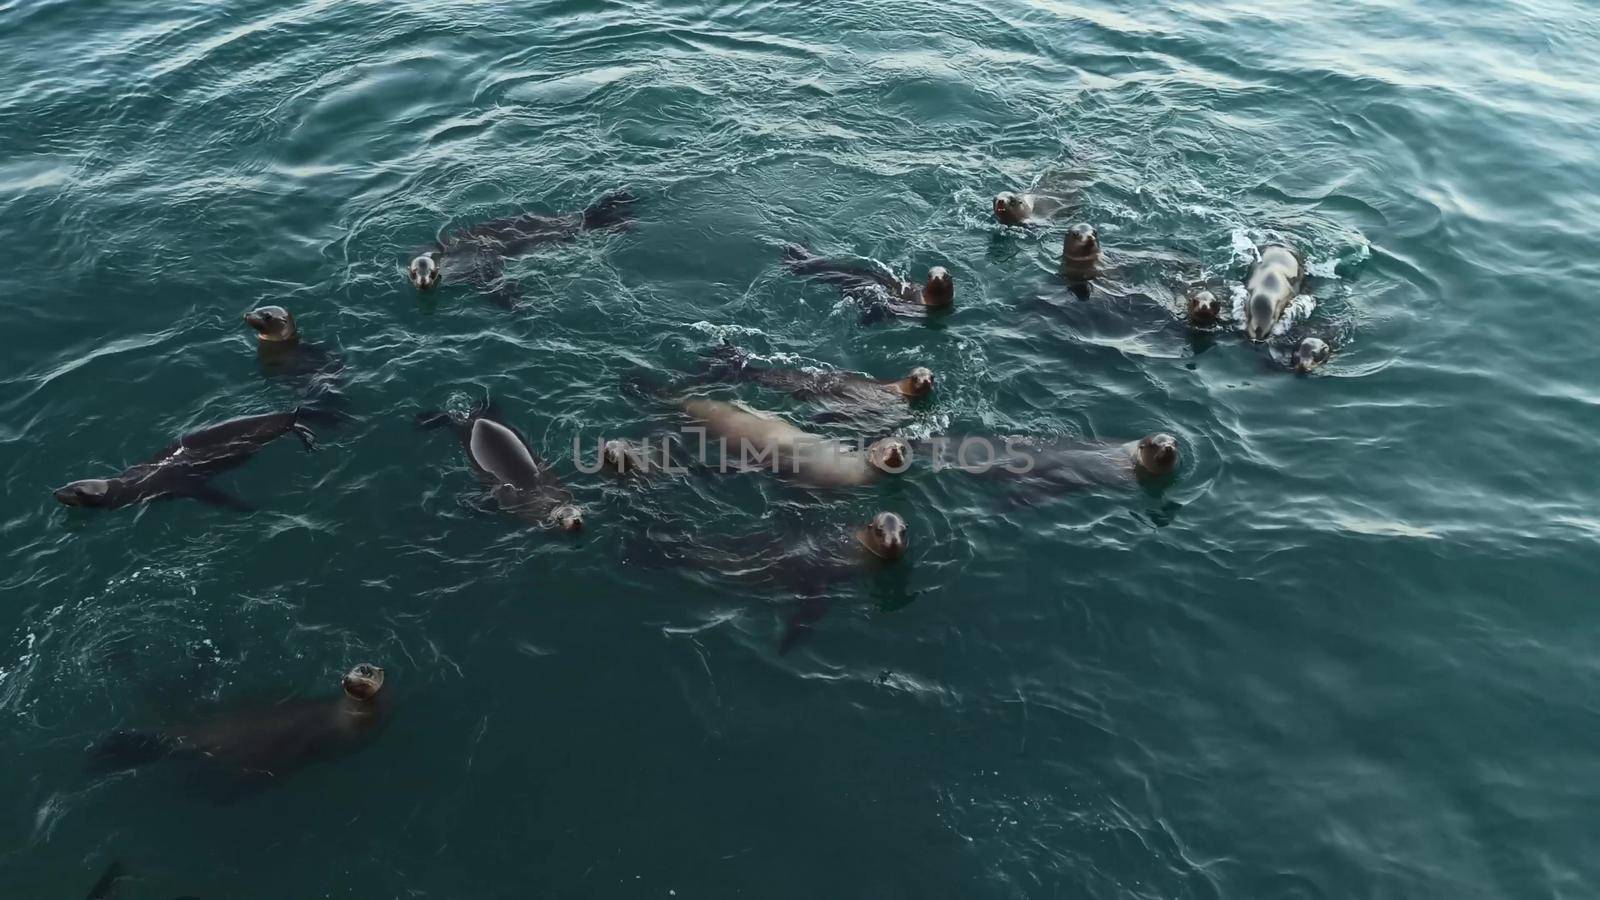 Wild cute seals colony or sea lions herd swimming in ocean water, playful funny behavior. Many marine animals in freedom dive underwater, view from above, Monterey pier, California coast wildlife, USA